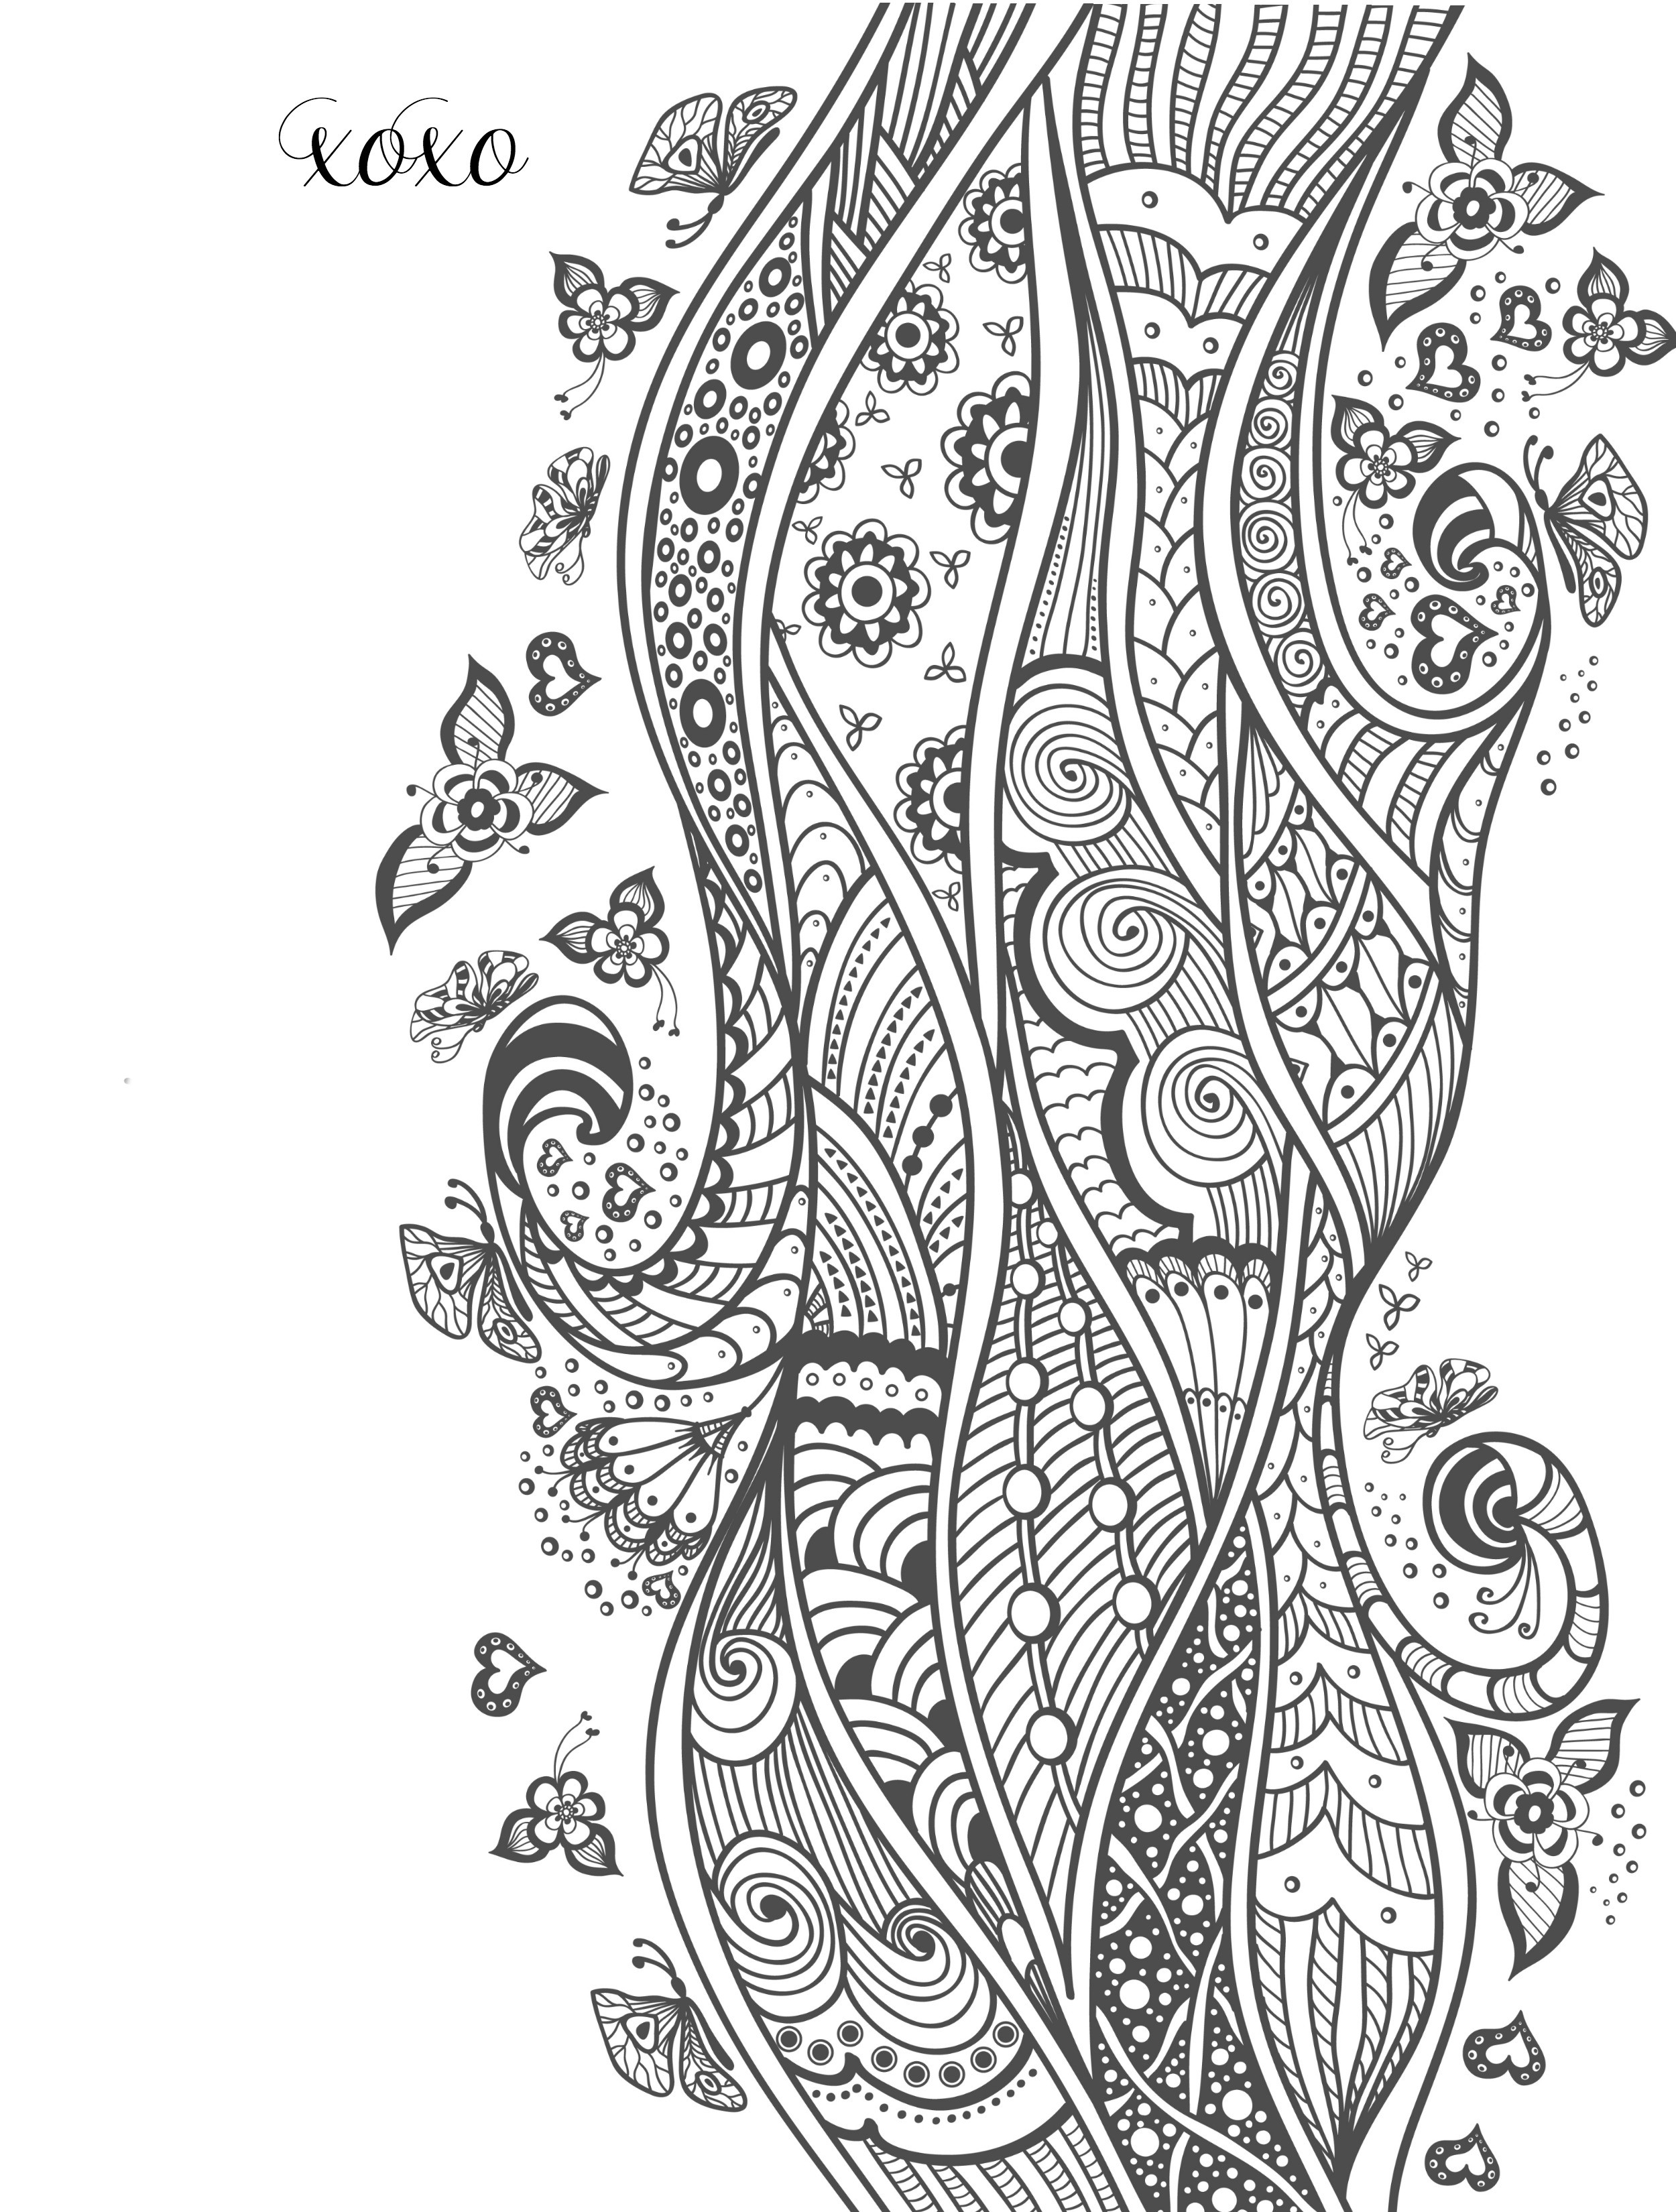 Free Valentine Coloring Pages For Adults
 20 Free Printable Valentines Adult Coloring Pages Nerdy